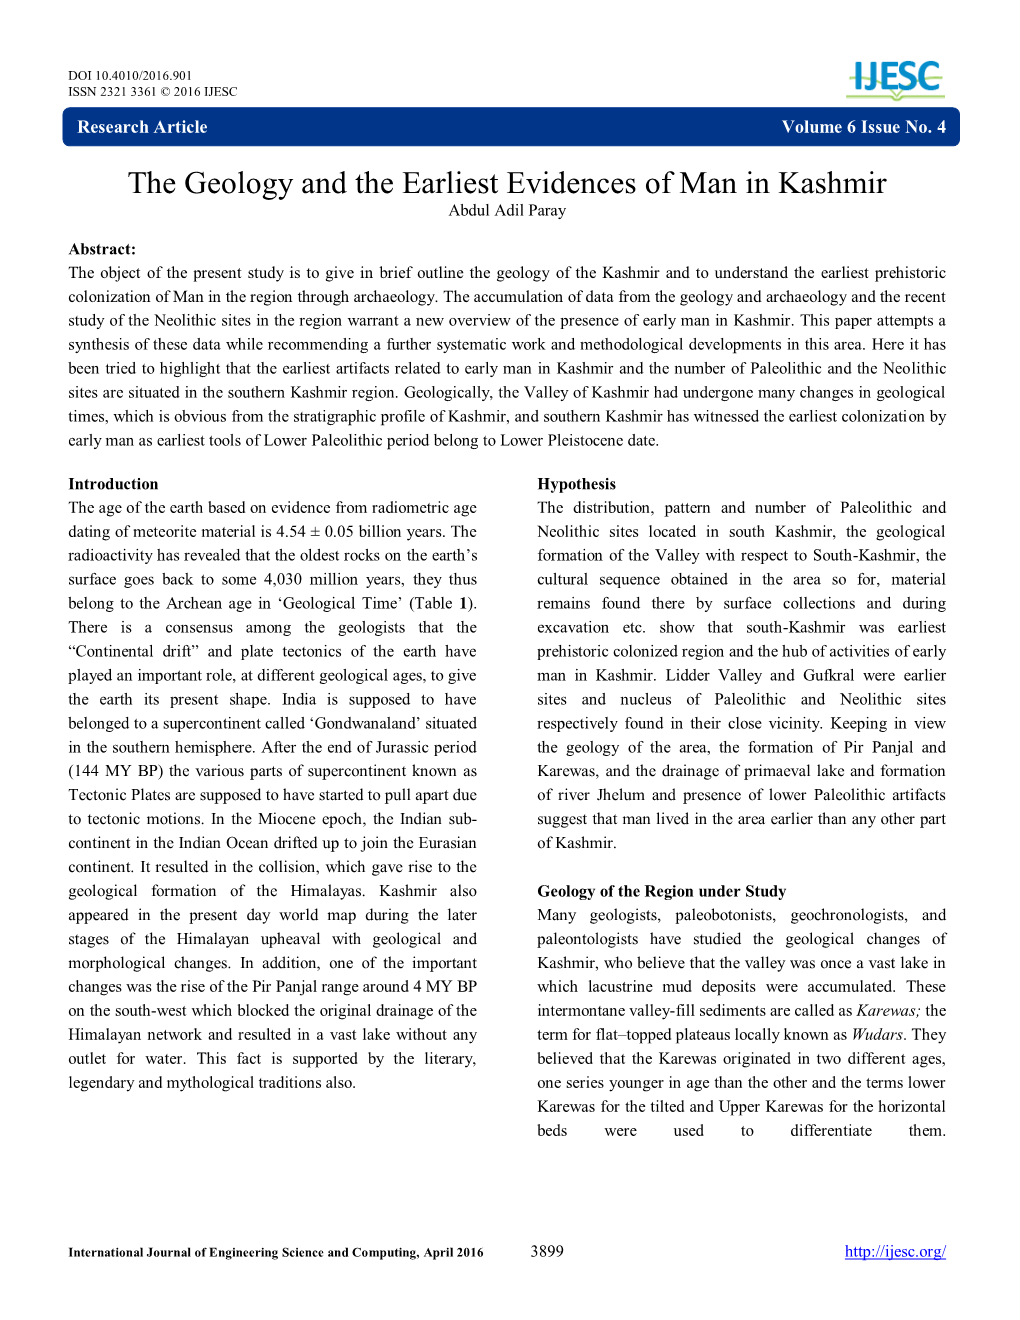 The Geology and the Earliest Evidences of Man in Kashmir Abdul Adil Paray